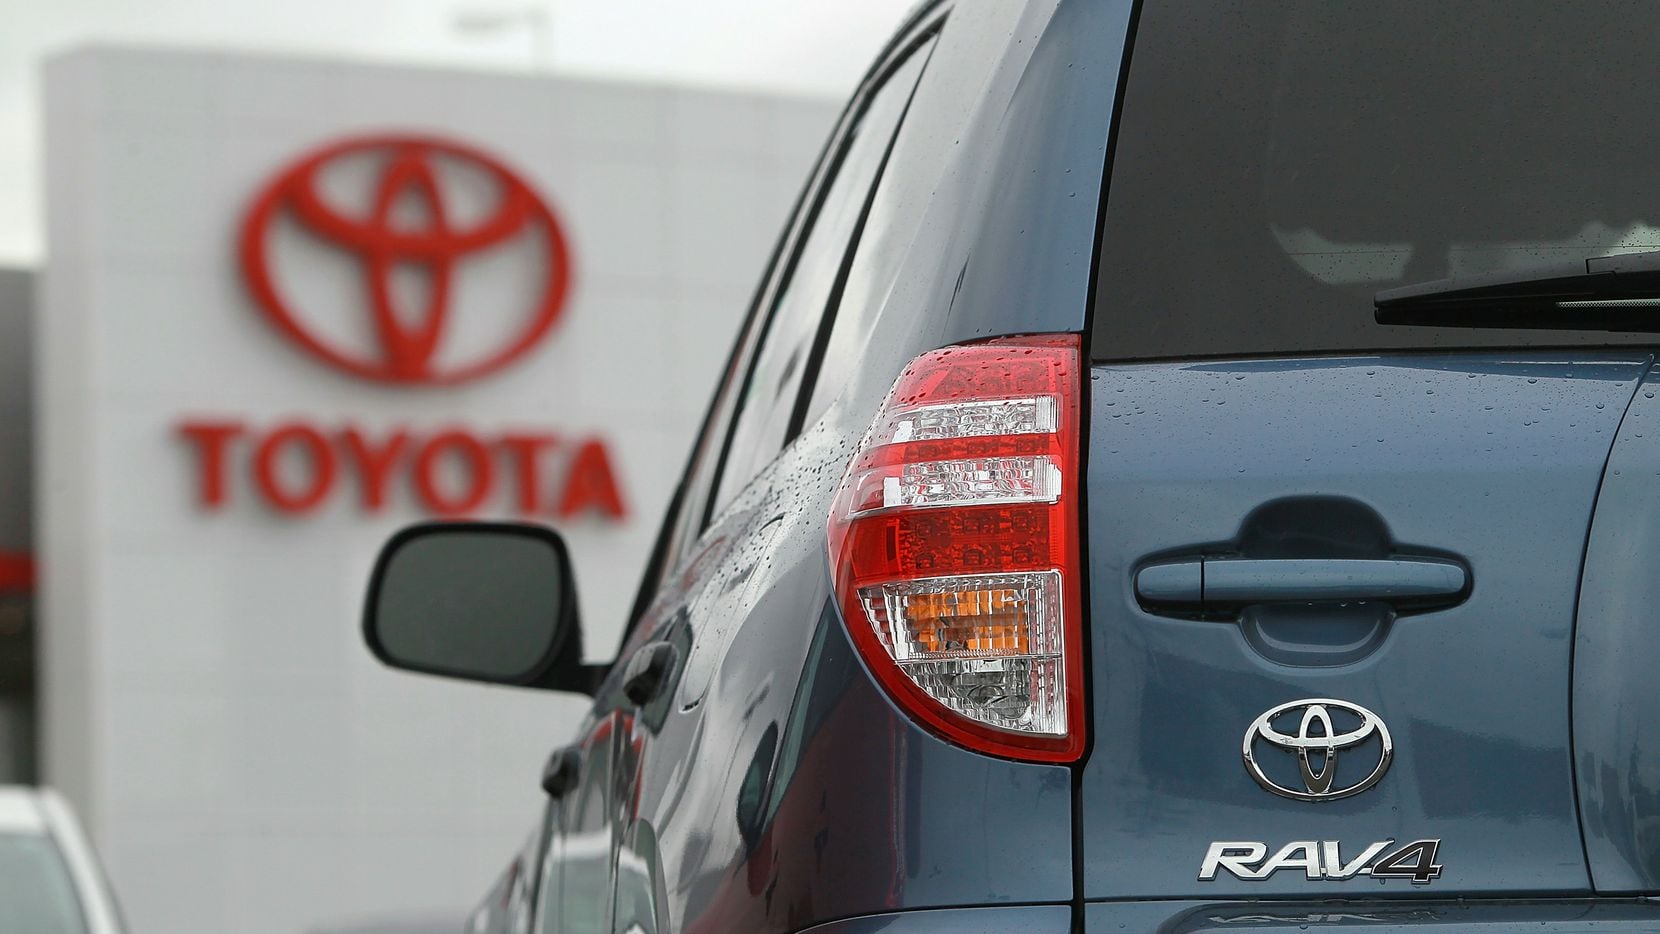 Last month, Toyota sold more  RAV4 vehicles than Camry sedans, an indication that buyers'...